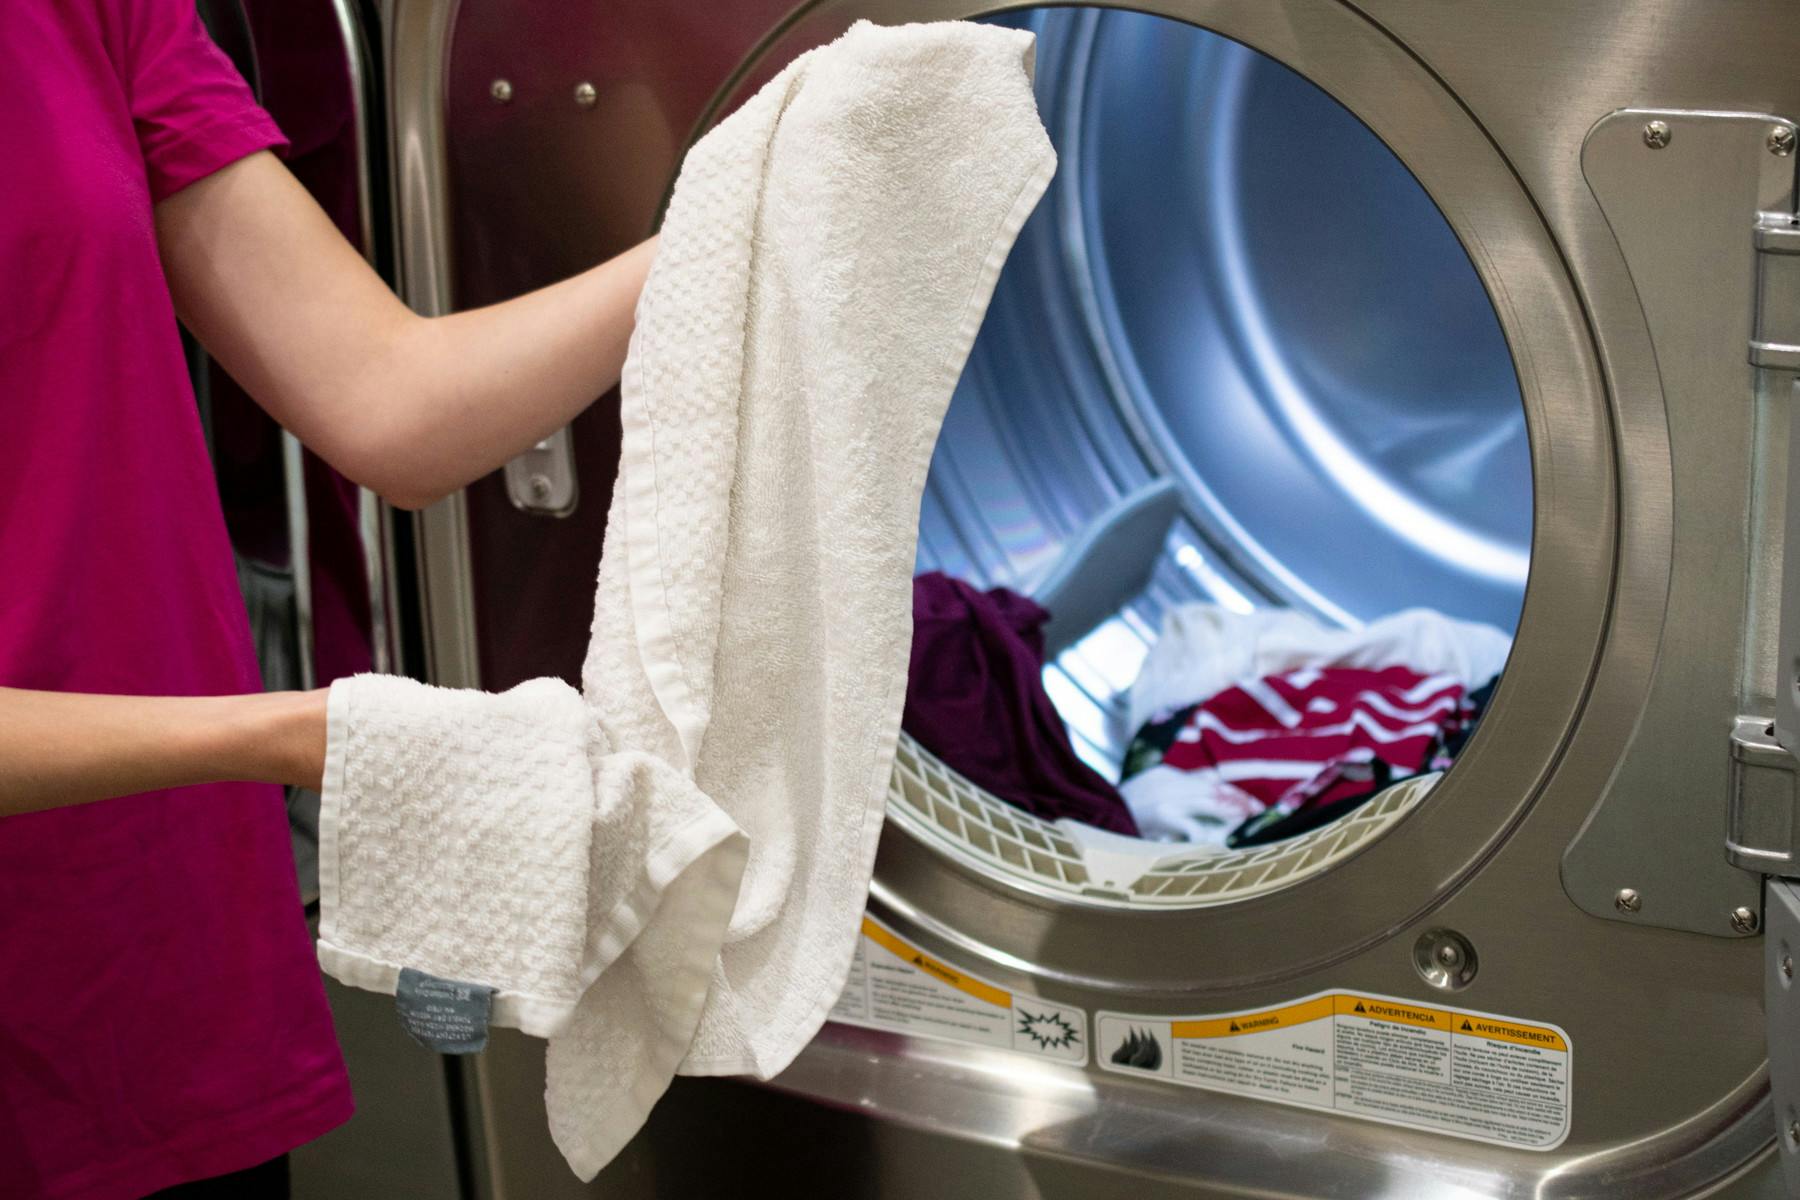 Woman holding a wrinkled towel in front of an open clothes dryer.